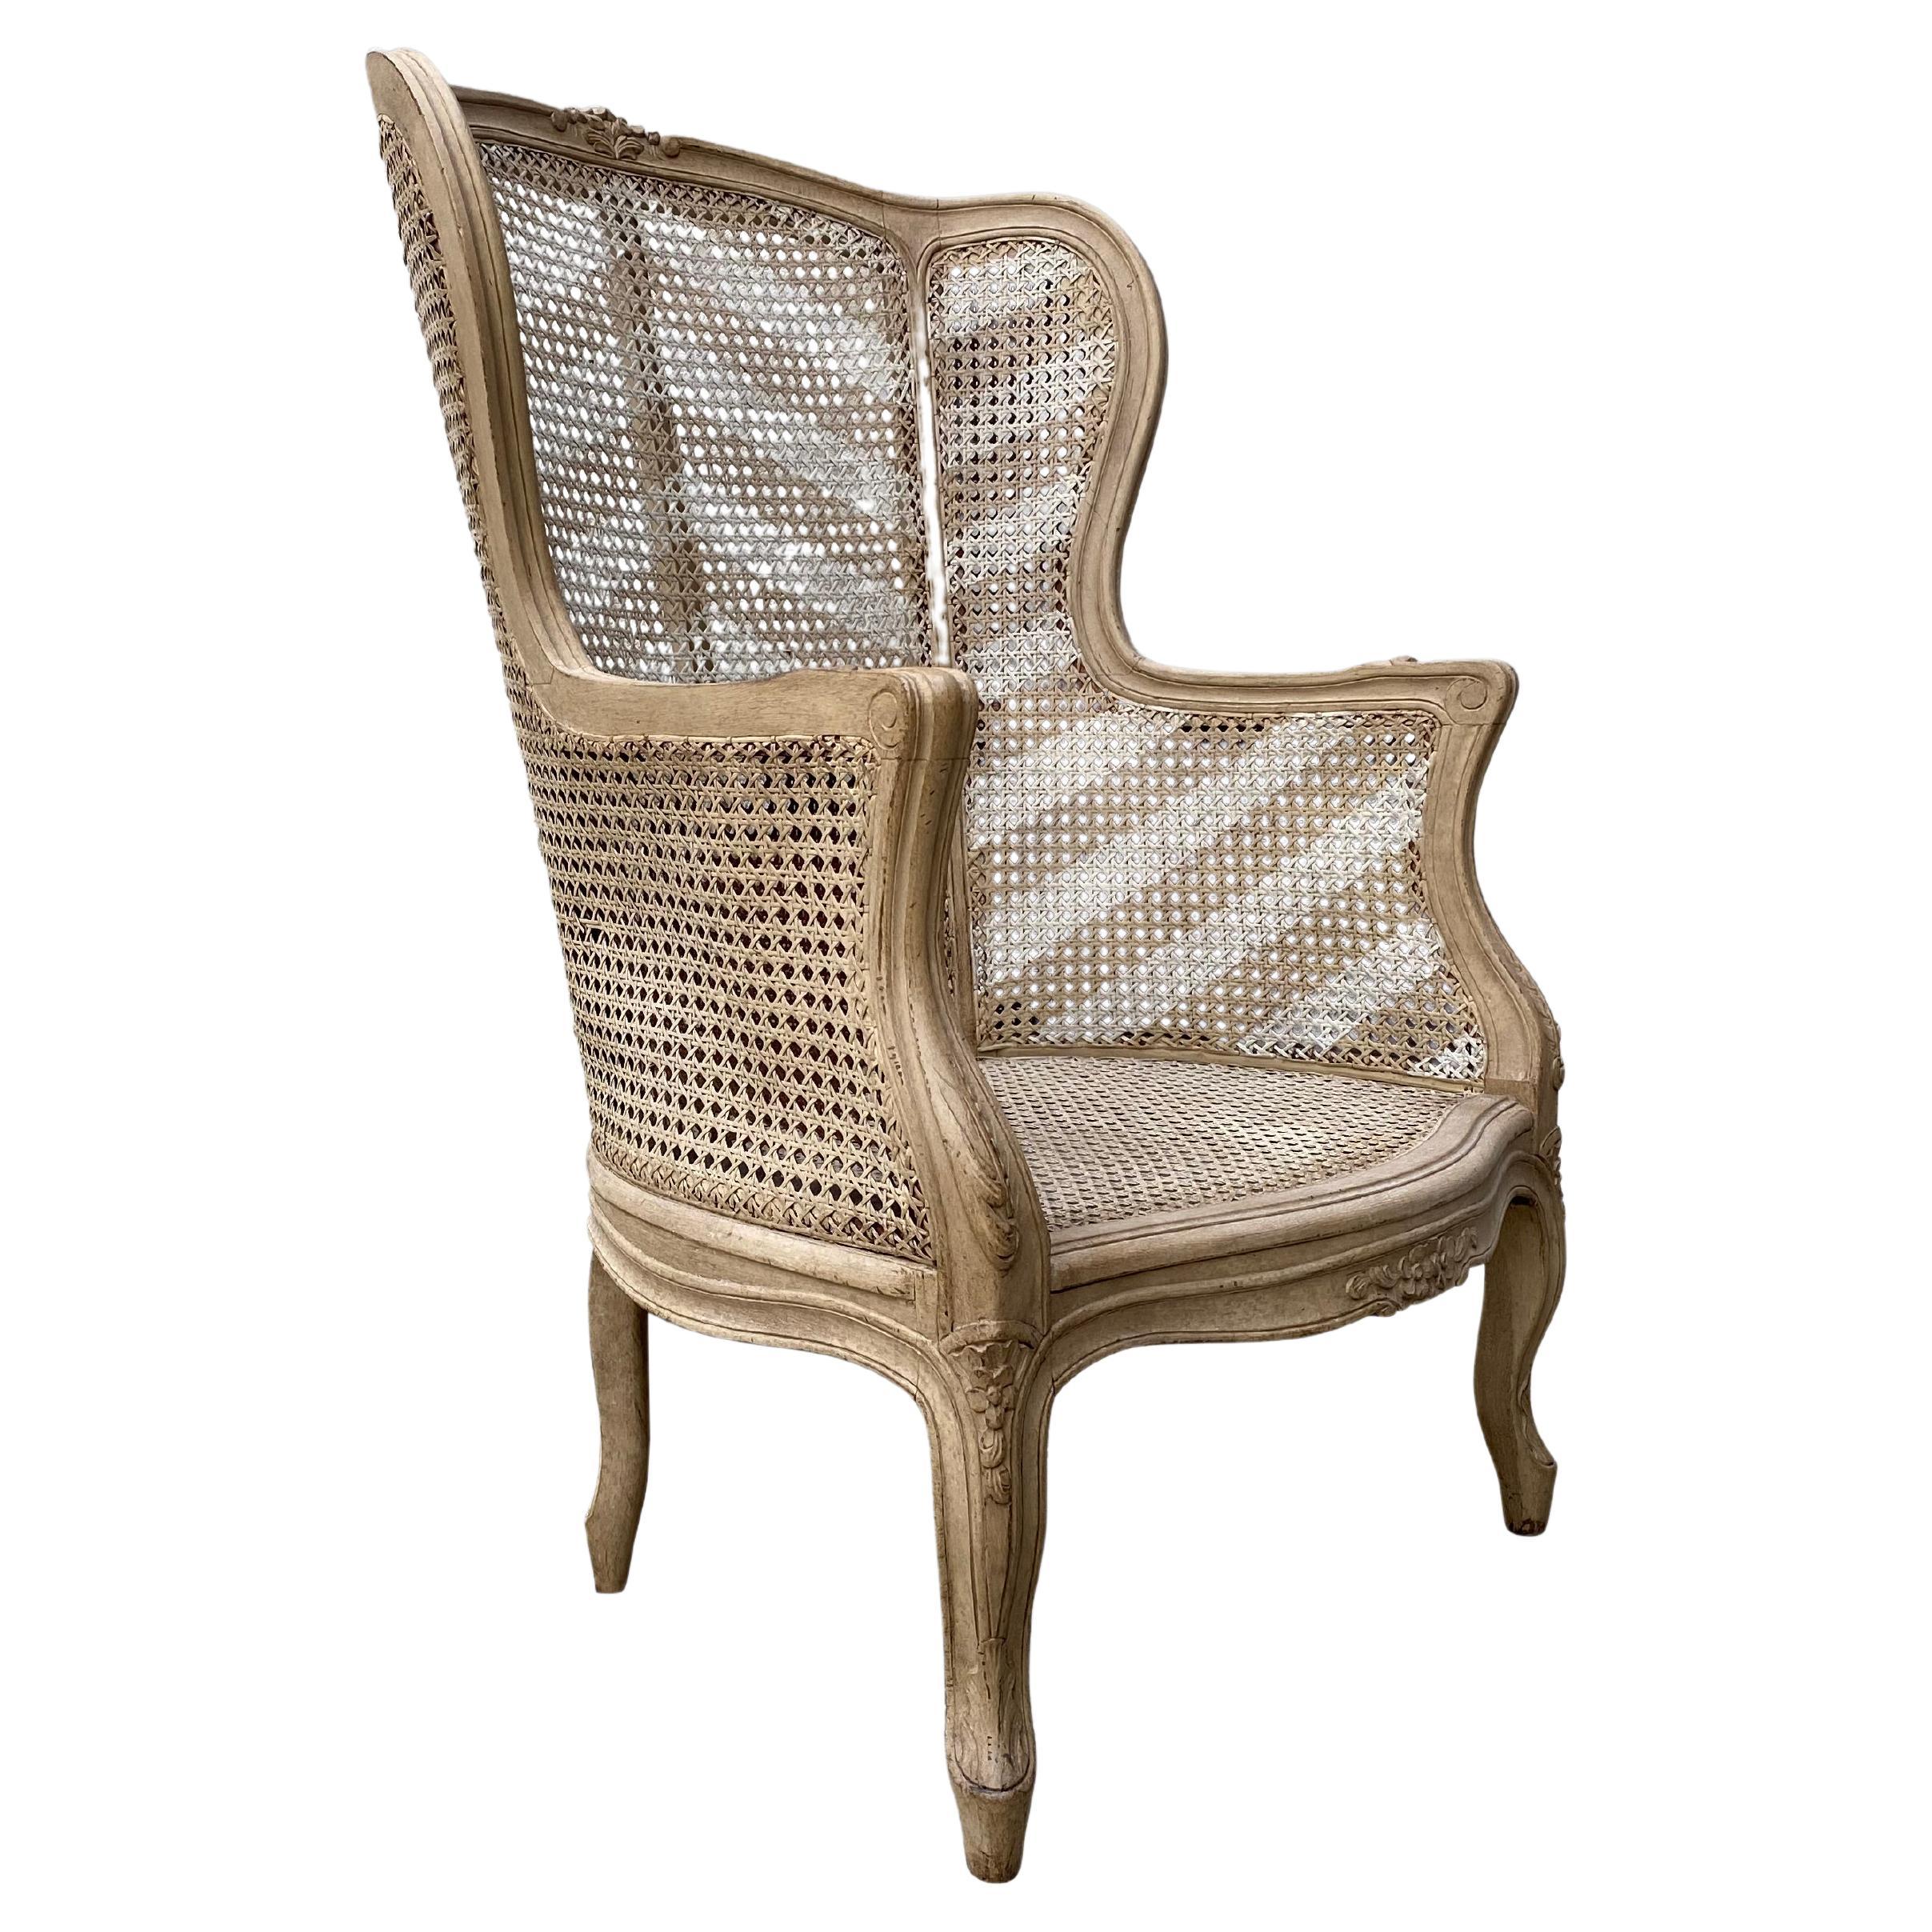 19th Century French Painted Double Caning Bergère Armchair For Sale